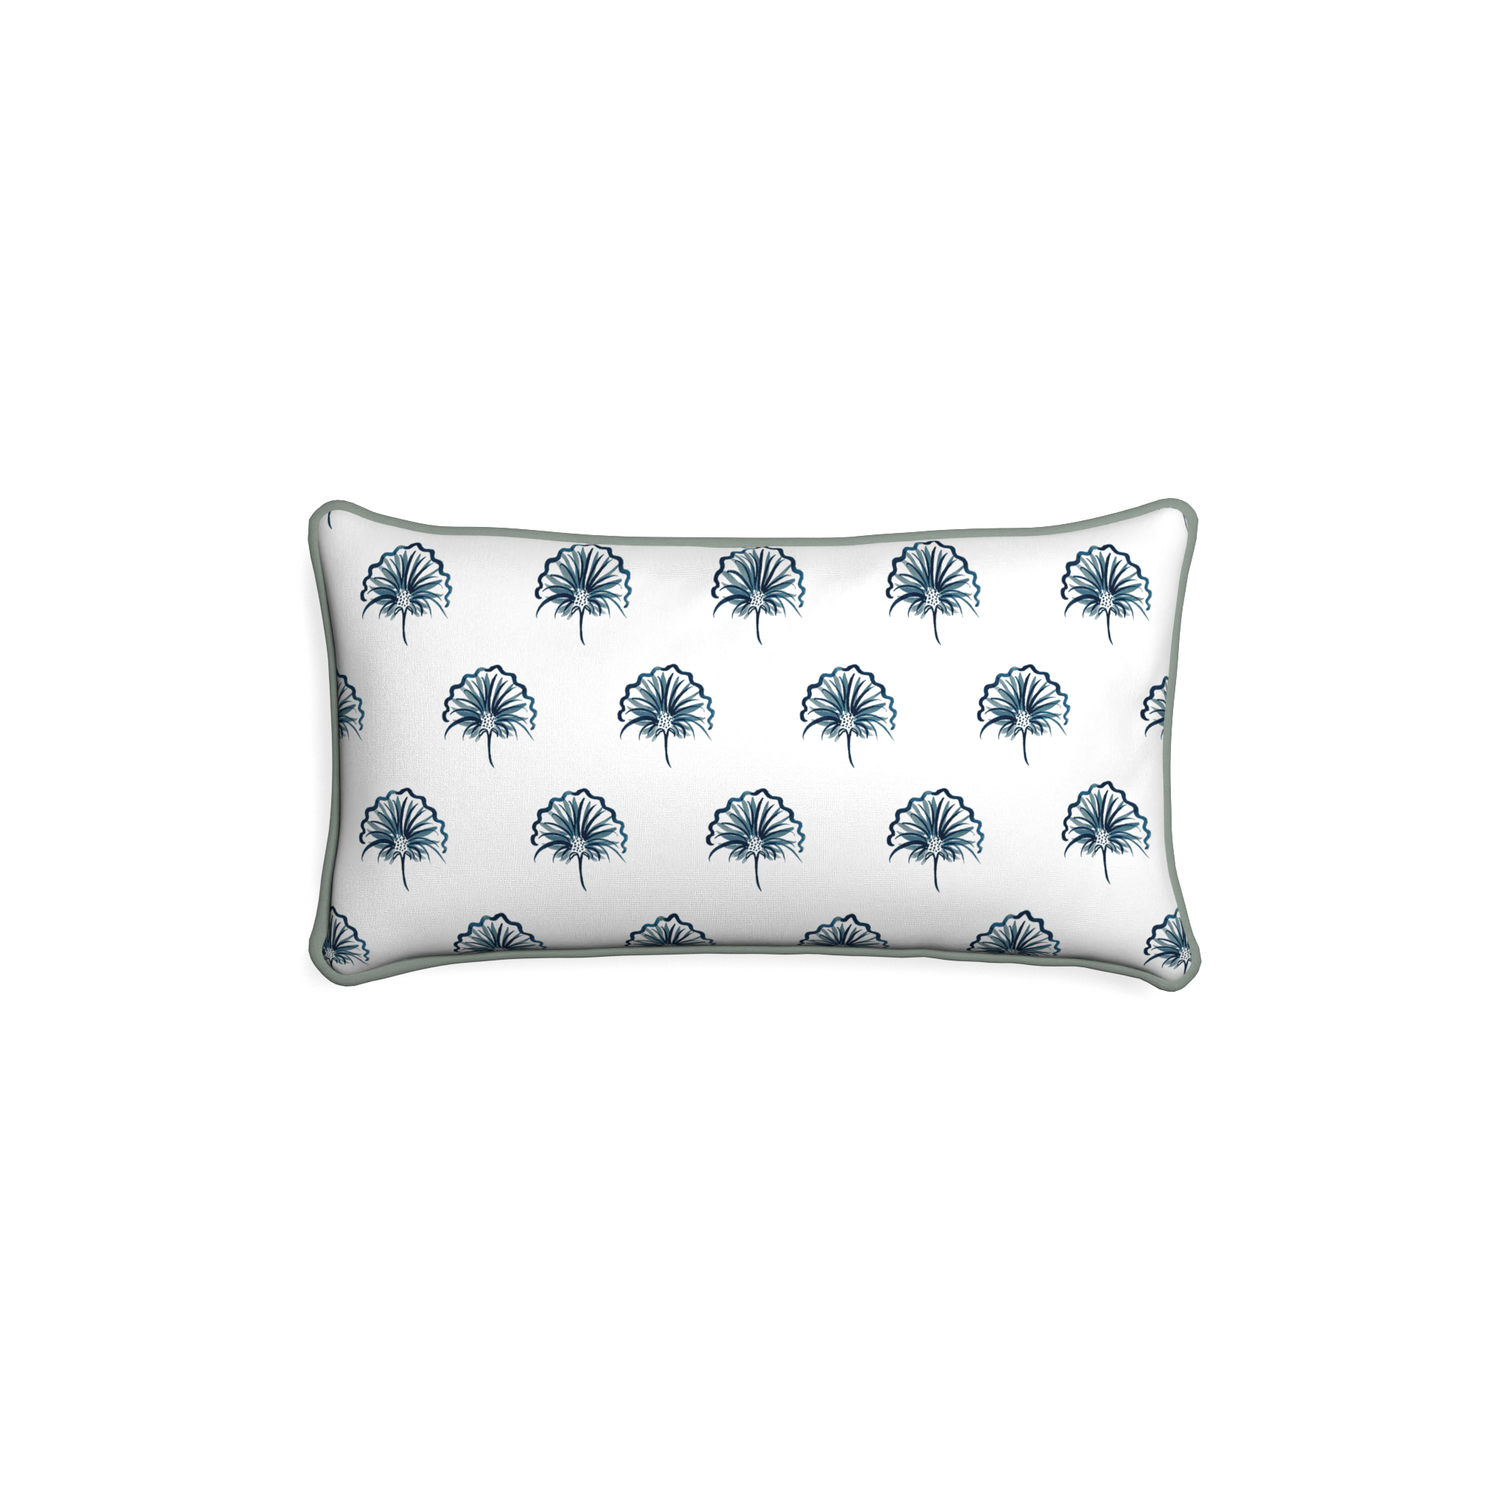 Petite-lumbar penelope midnight custom floral navypillow with sage piping on white background